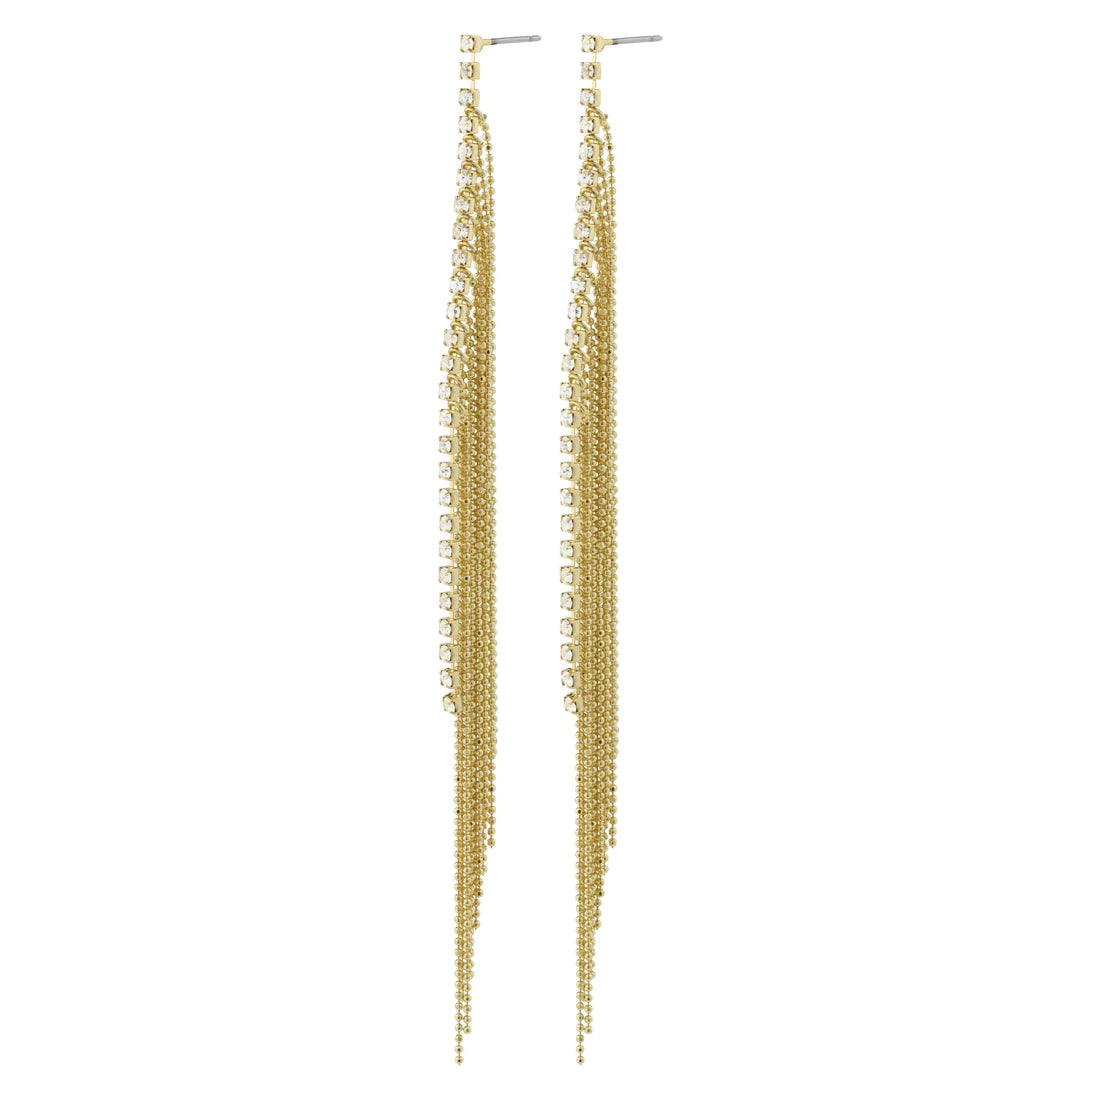 Donkey Earrings With Cascading Crystals - Rental